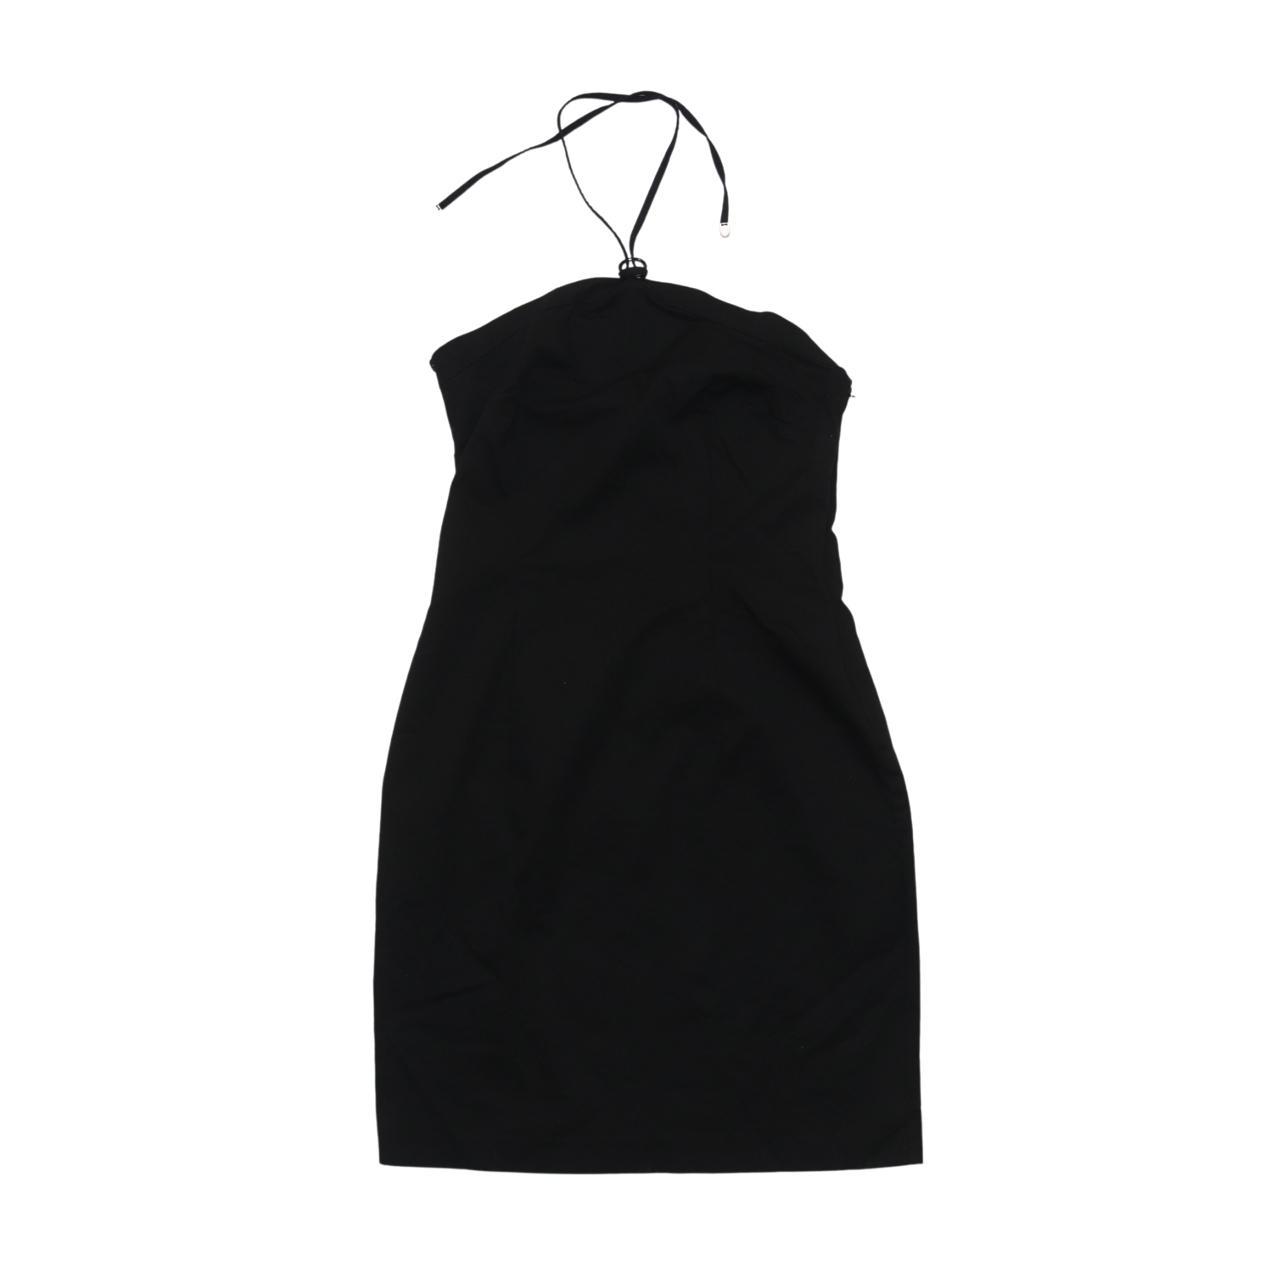 Product Image 1 - The Silky Tank! Brand: Express!